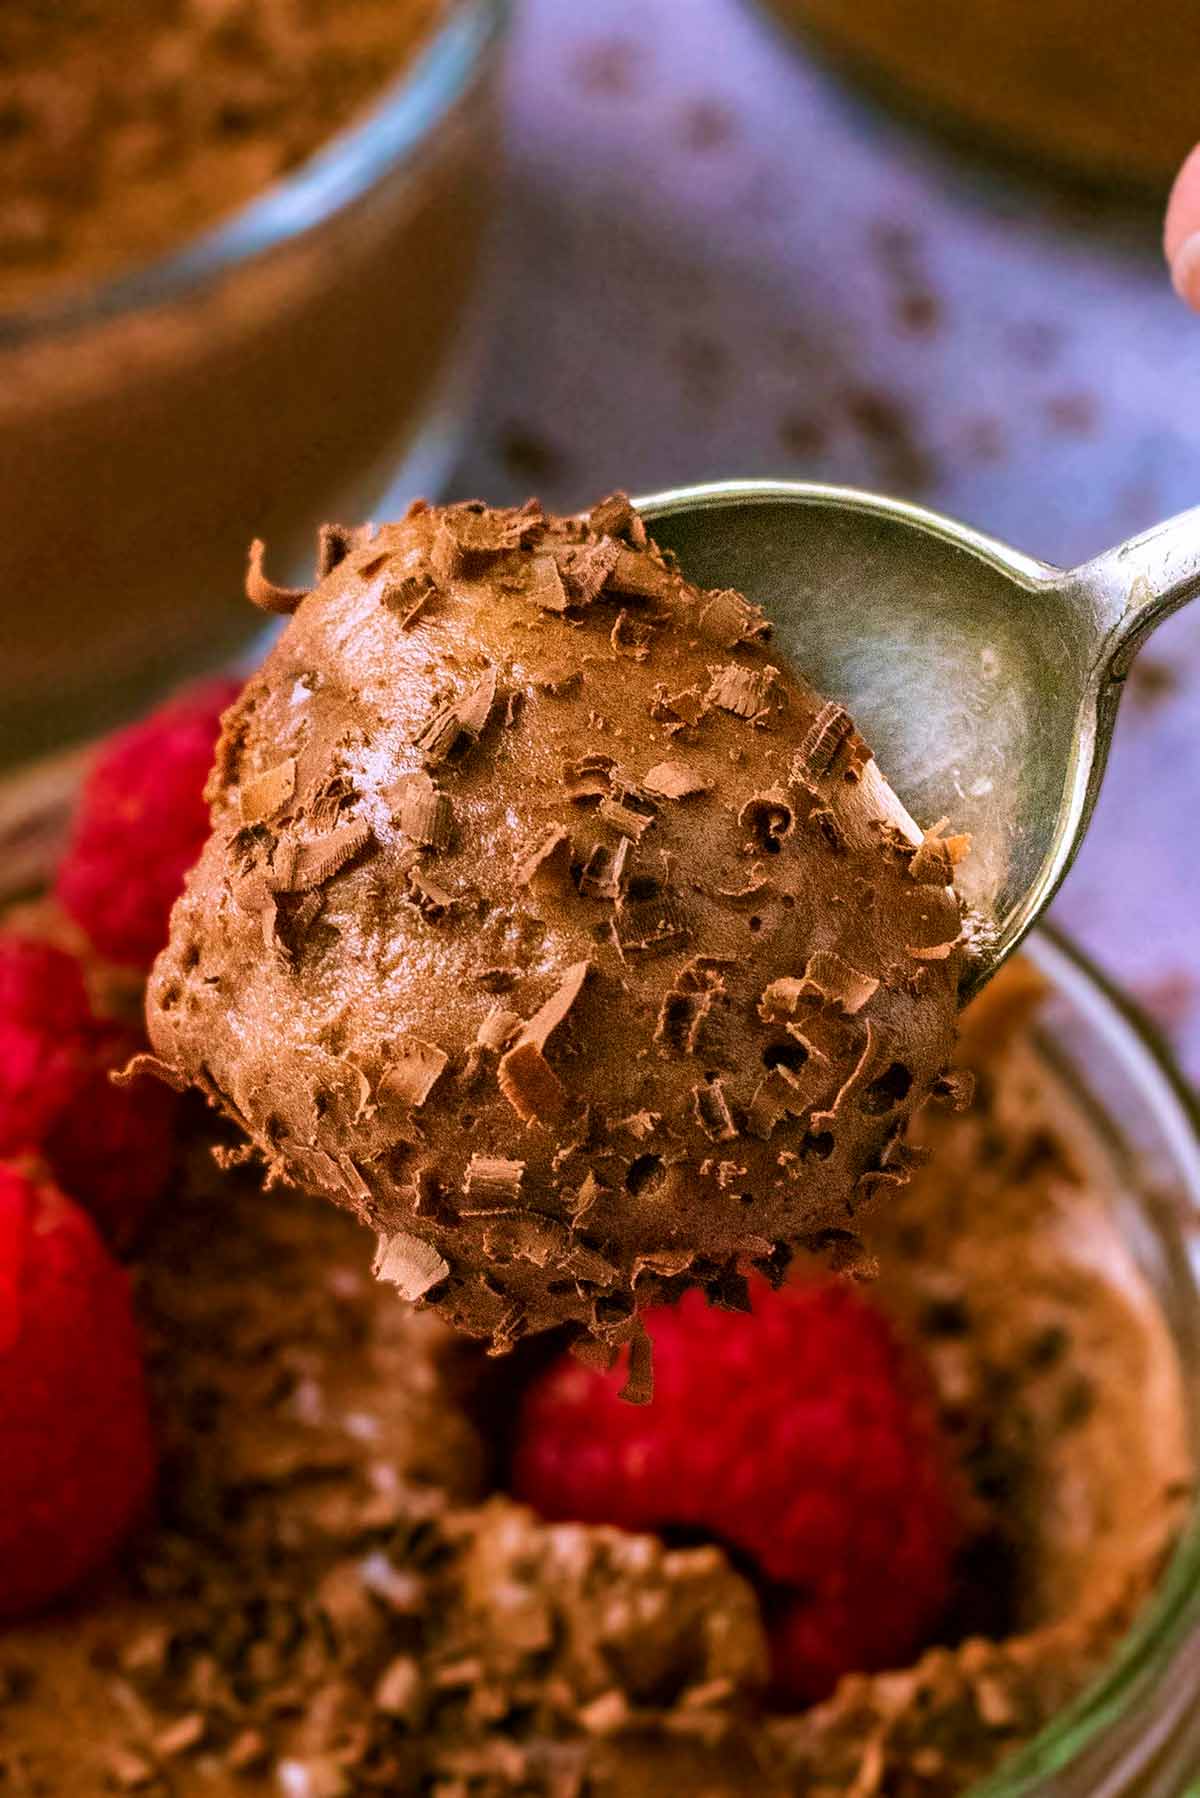 A teaspoon scooping some chocolate mousse.